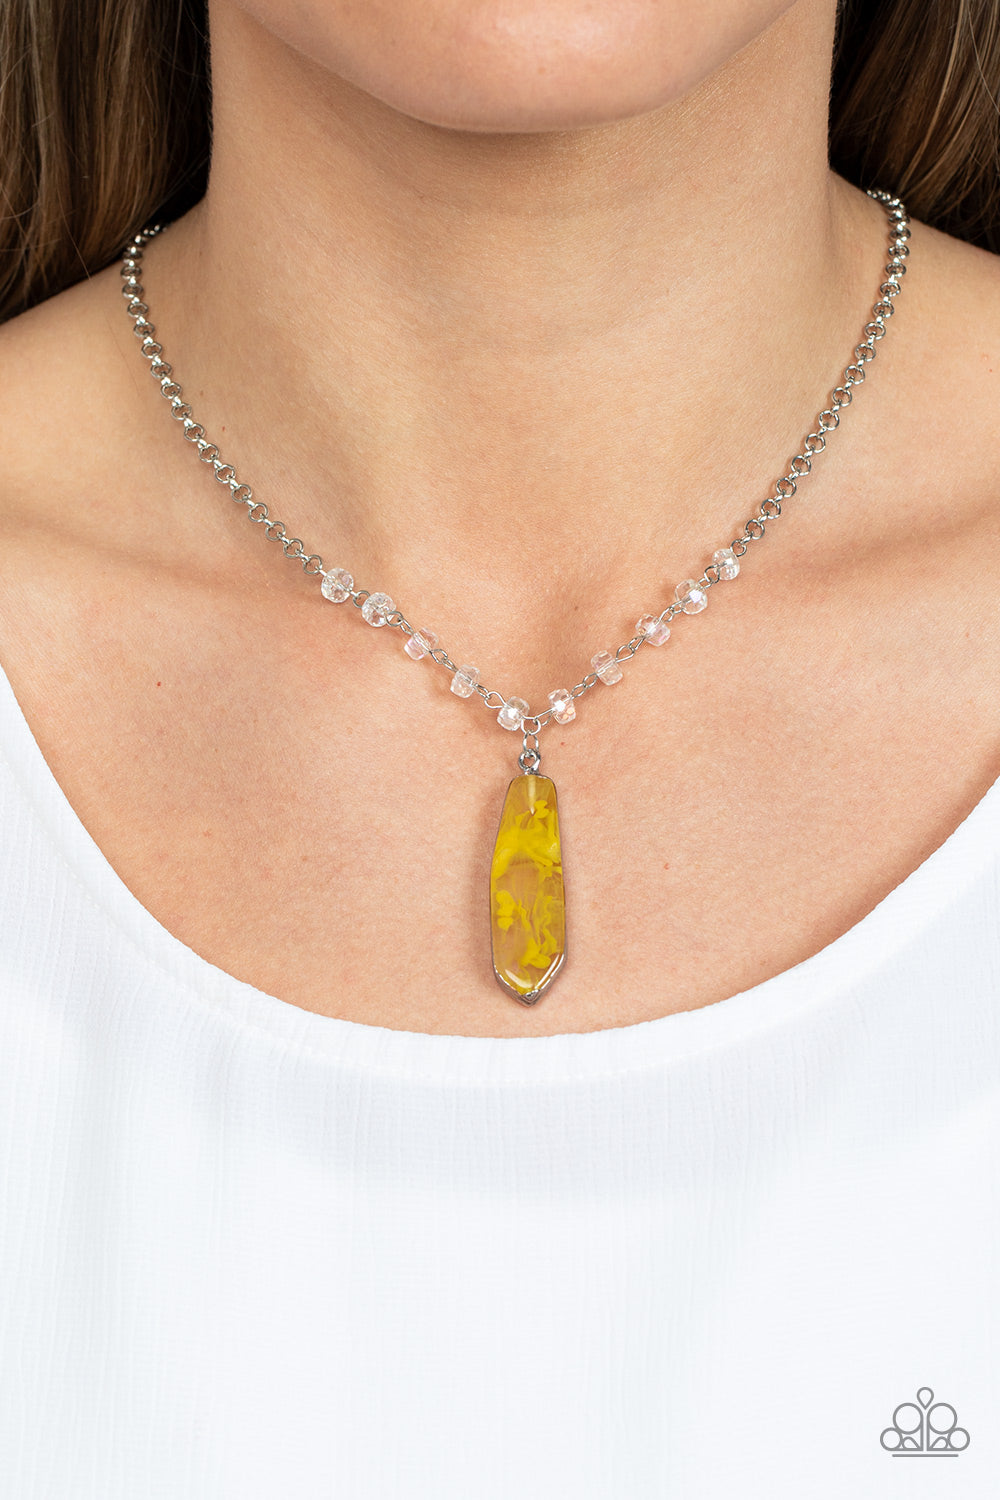 Paparazzi Necklaces - Magical Remedy - Yellow